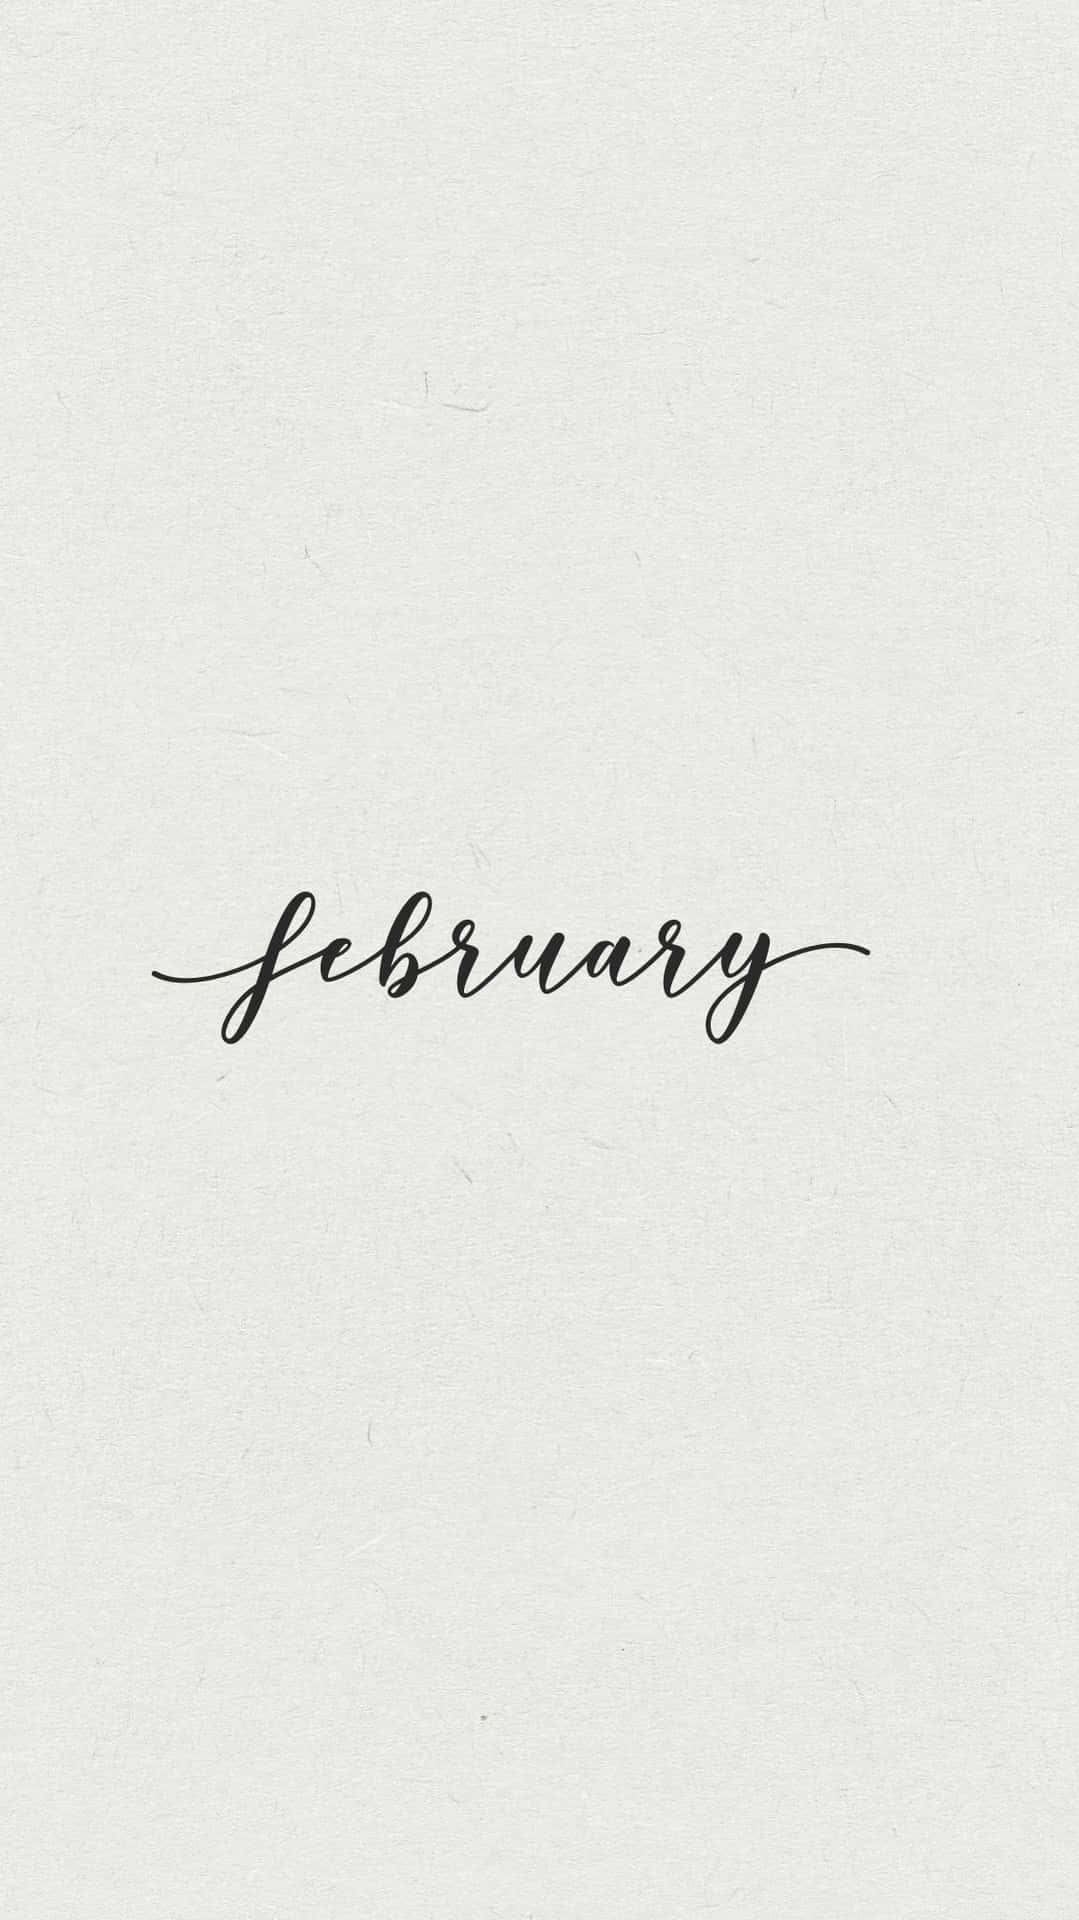 Welcome the New Month of February!